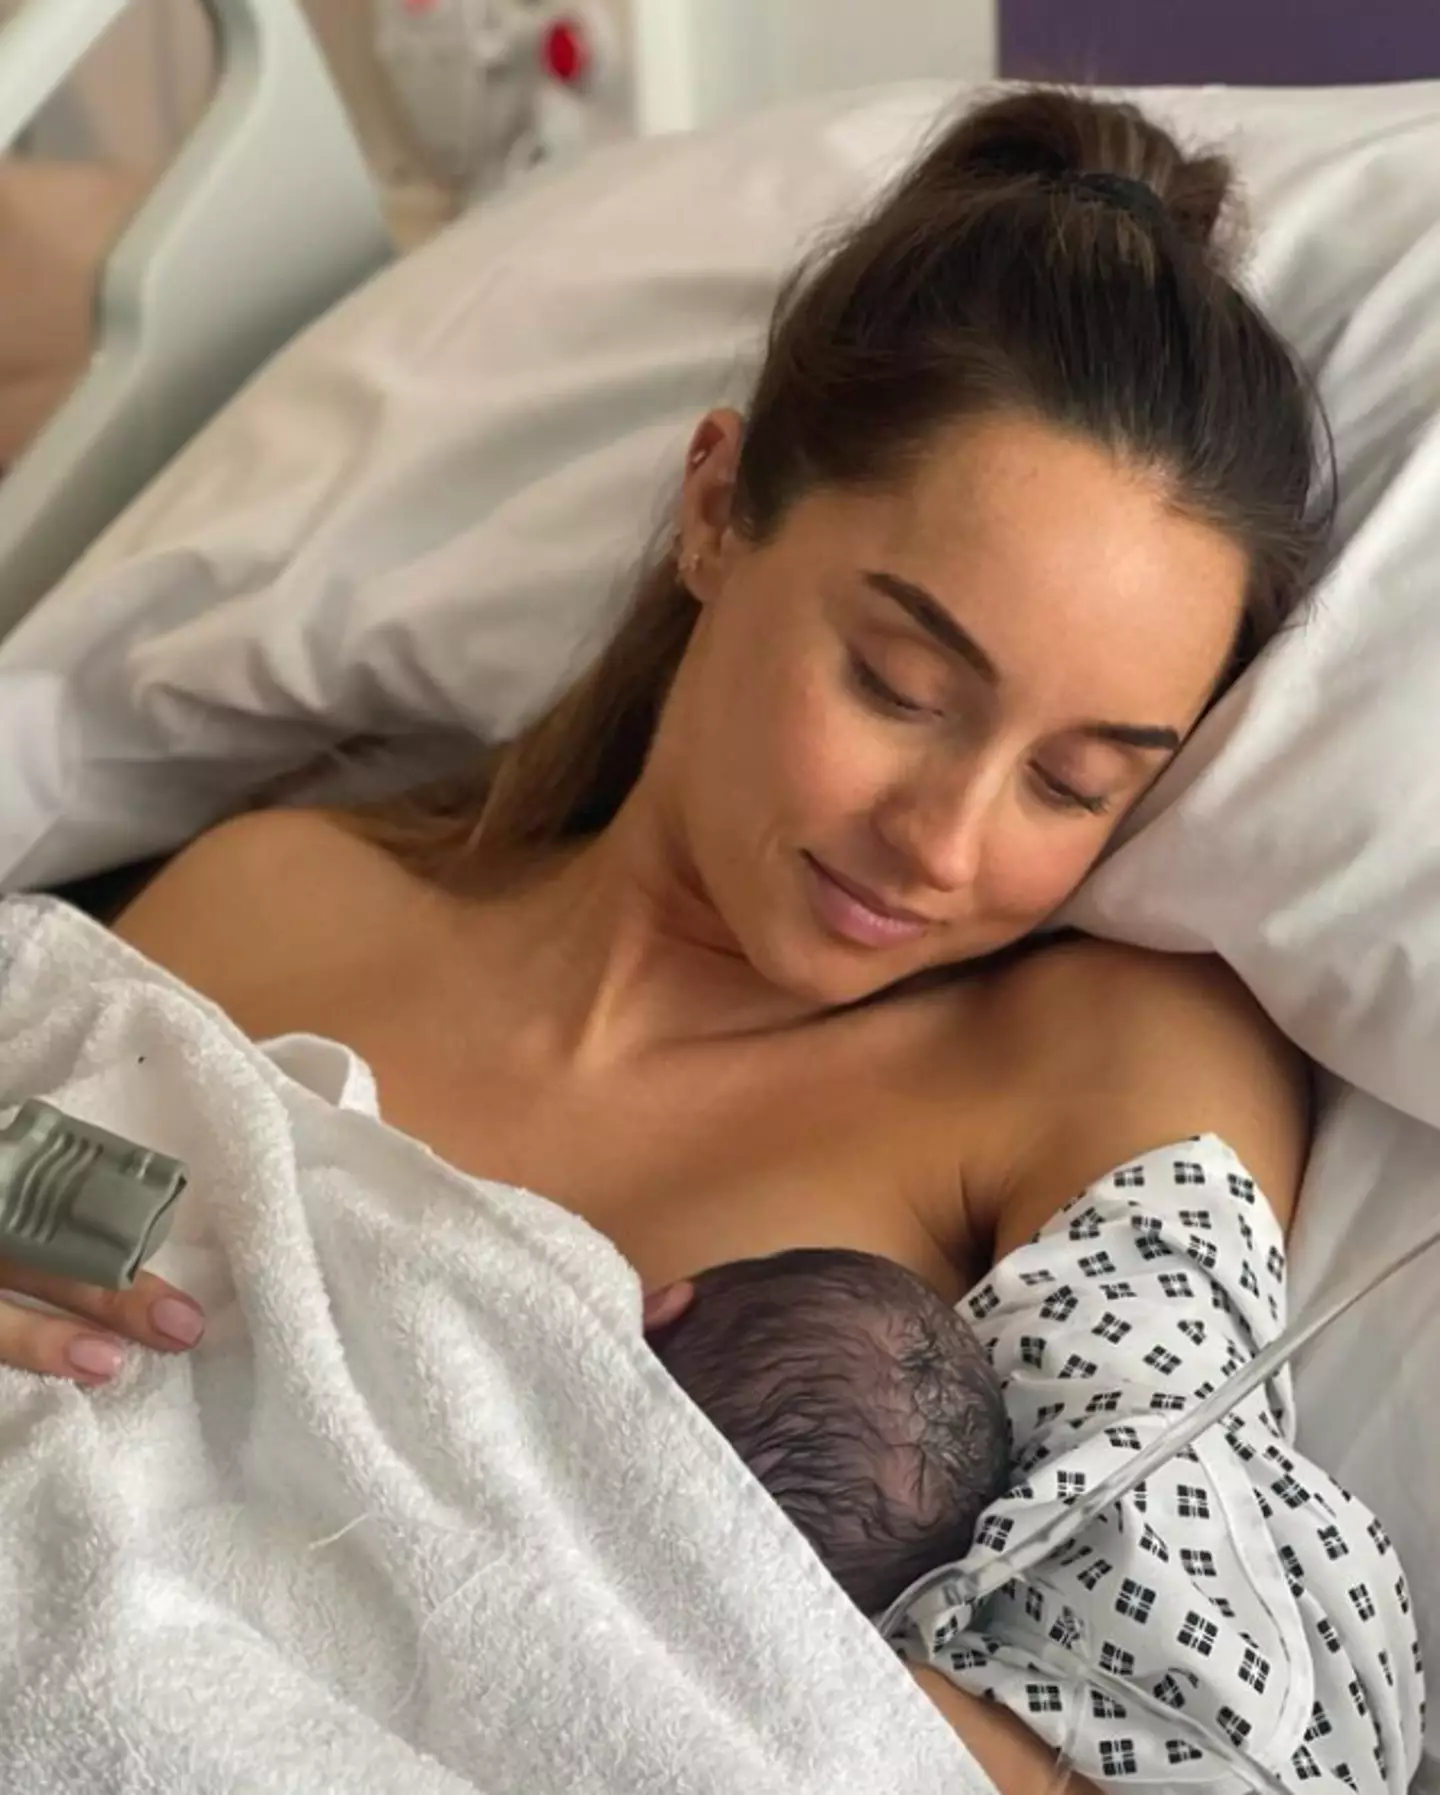 Peter and Emily welcomed their daughter last month. (Instagram/@peterandre)